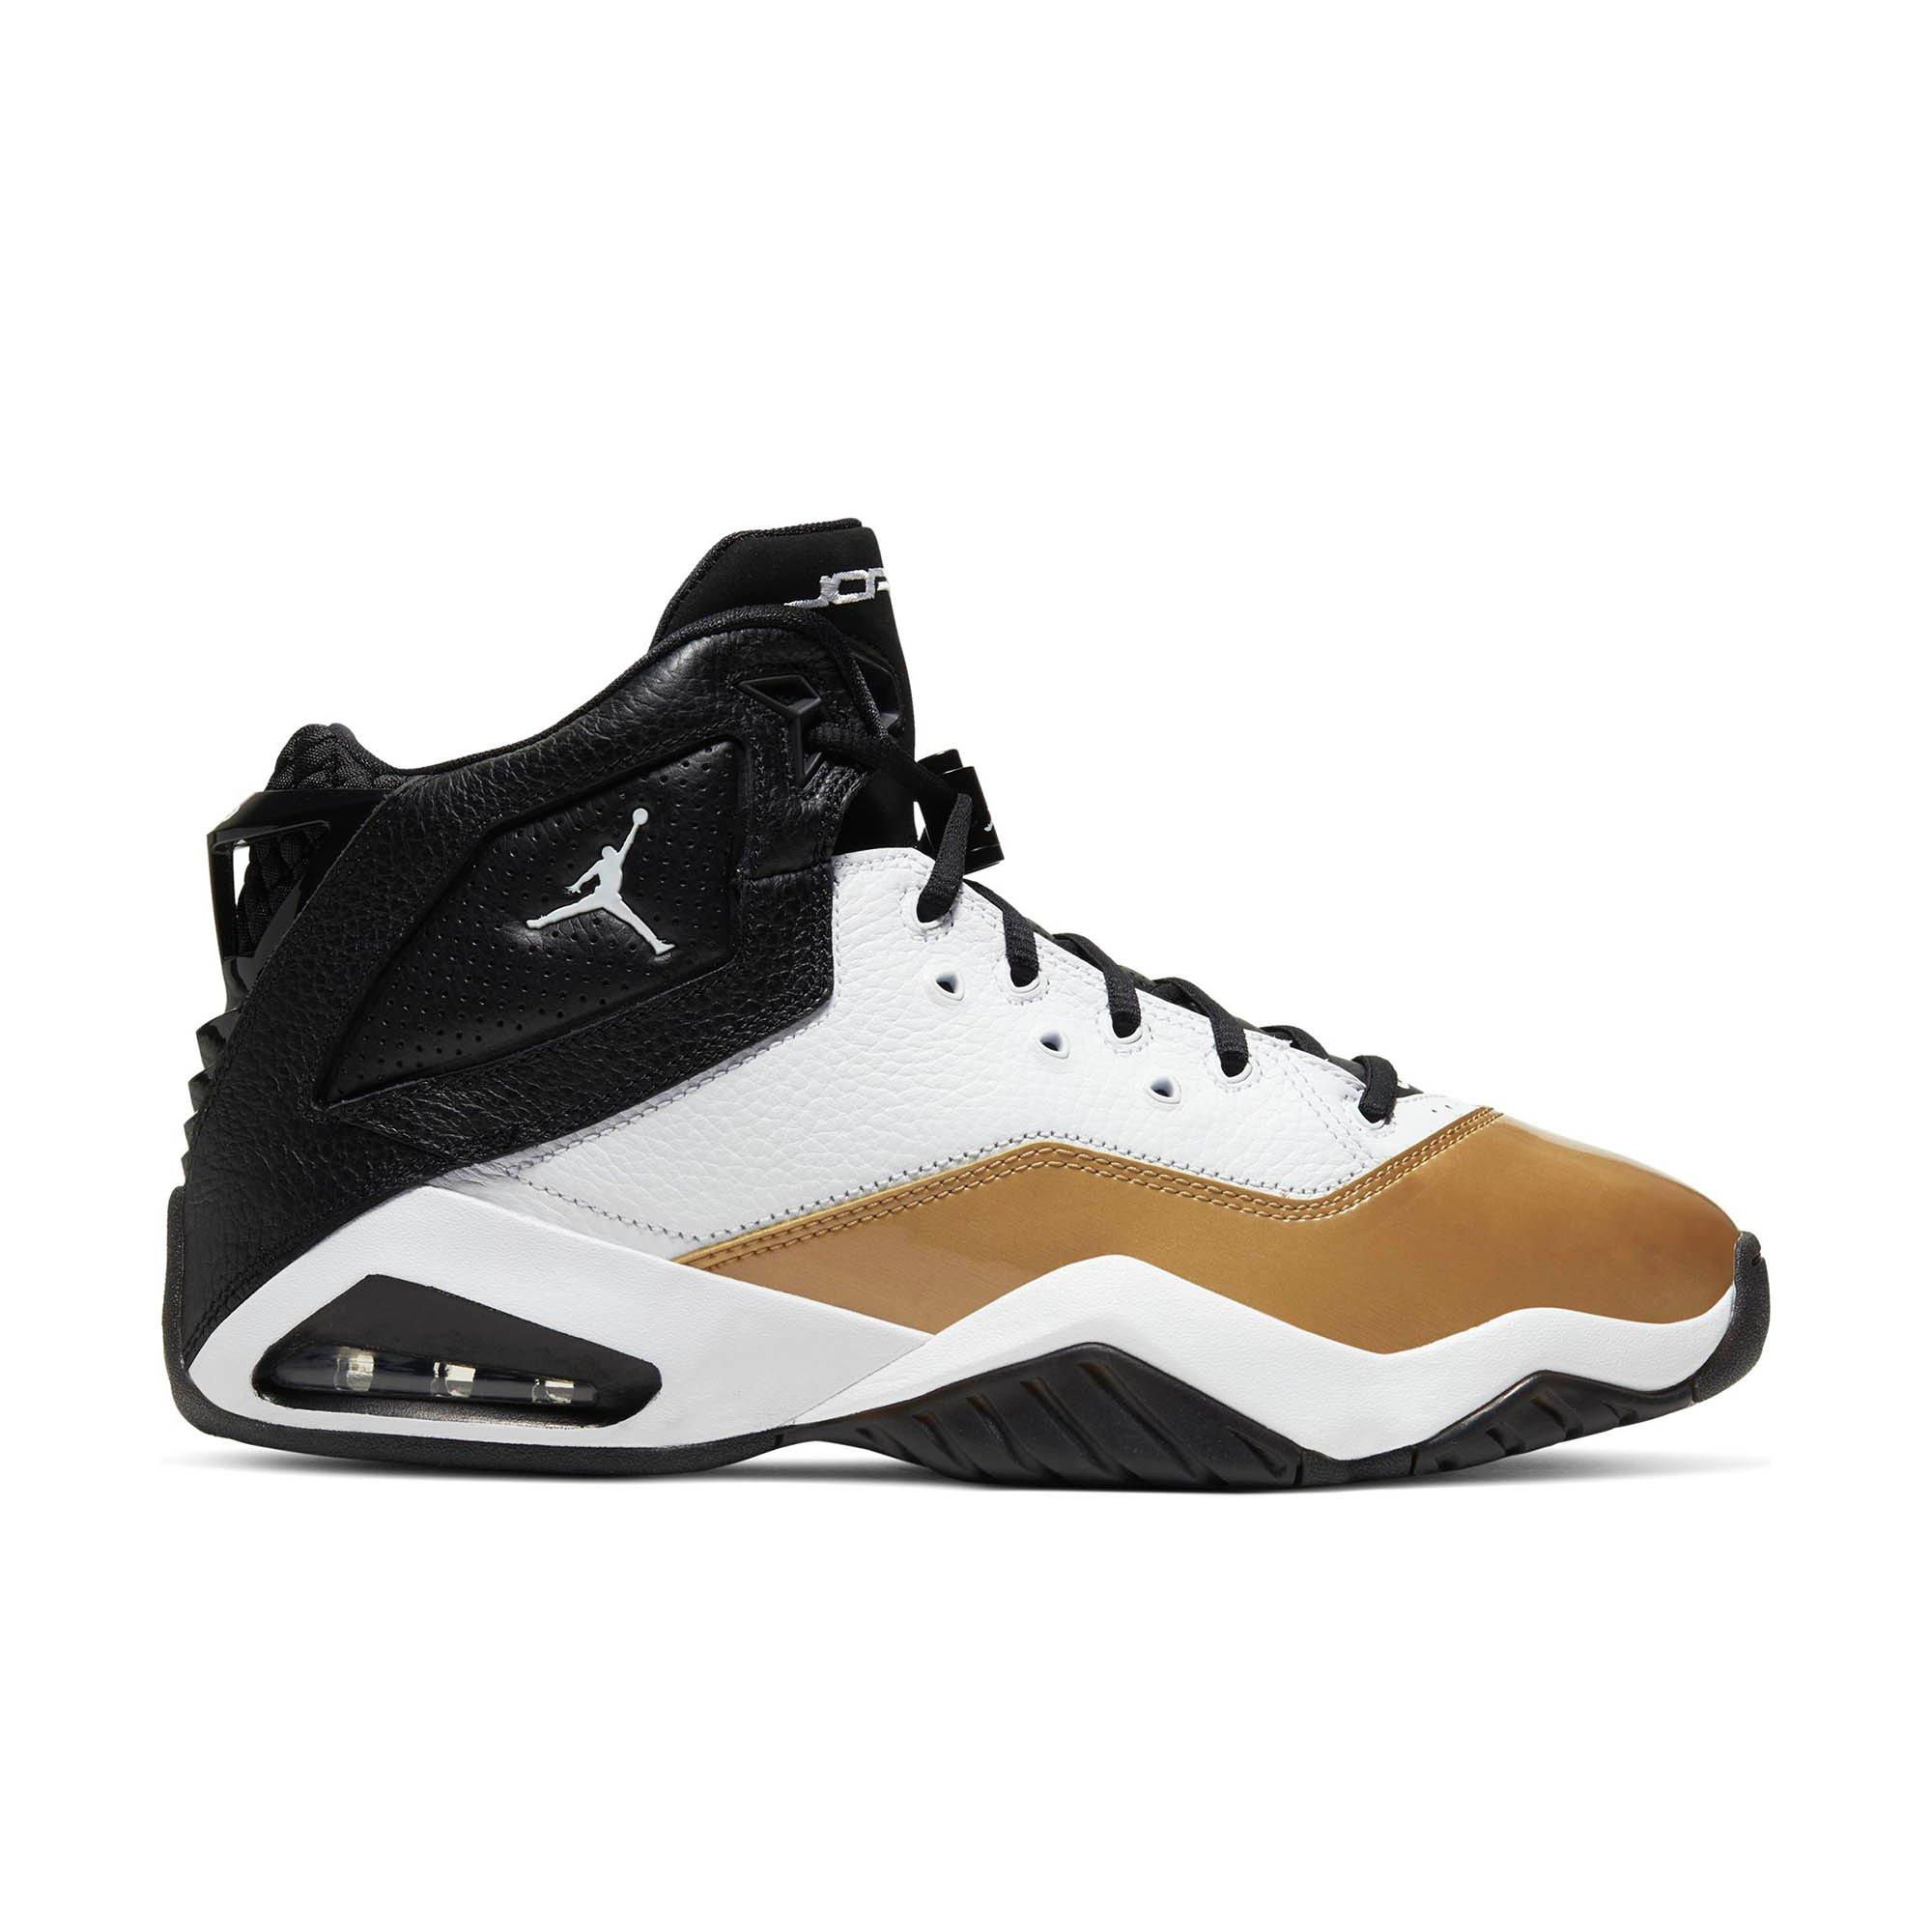 jordans black and white and gold